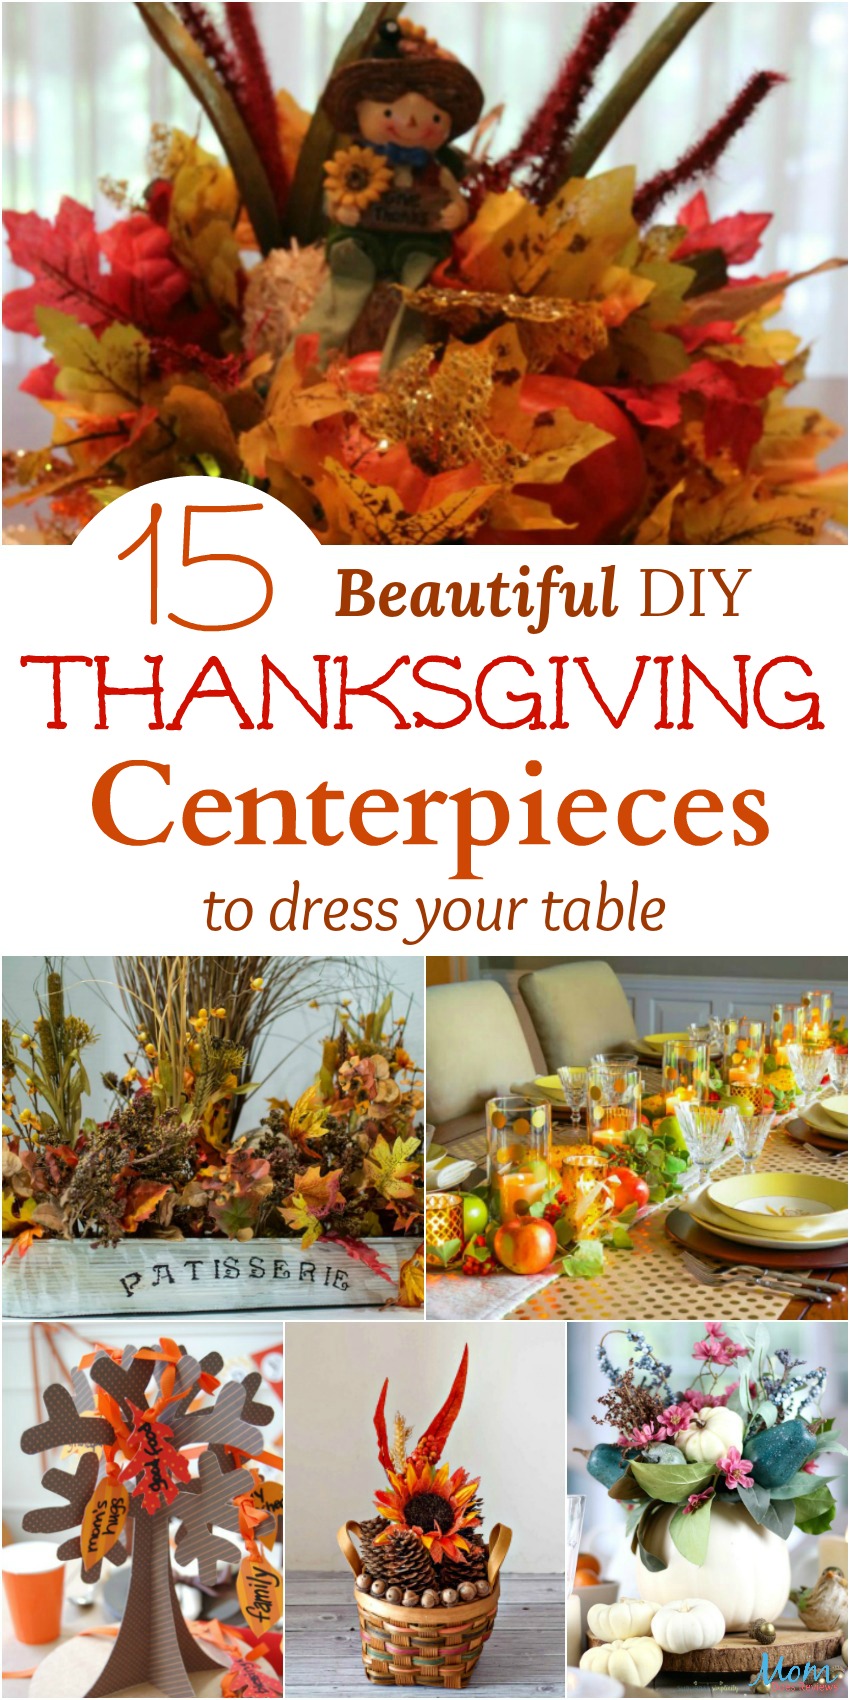 15 Beautiful DIY Thanksgiving Centerpieces to Dress Your Table